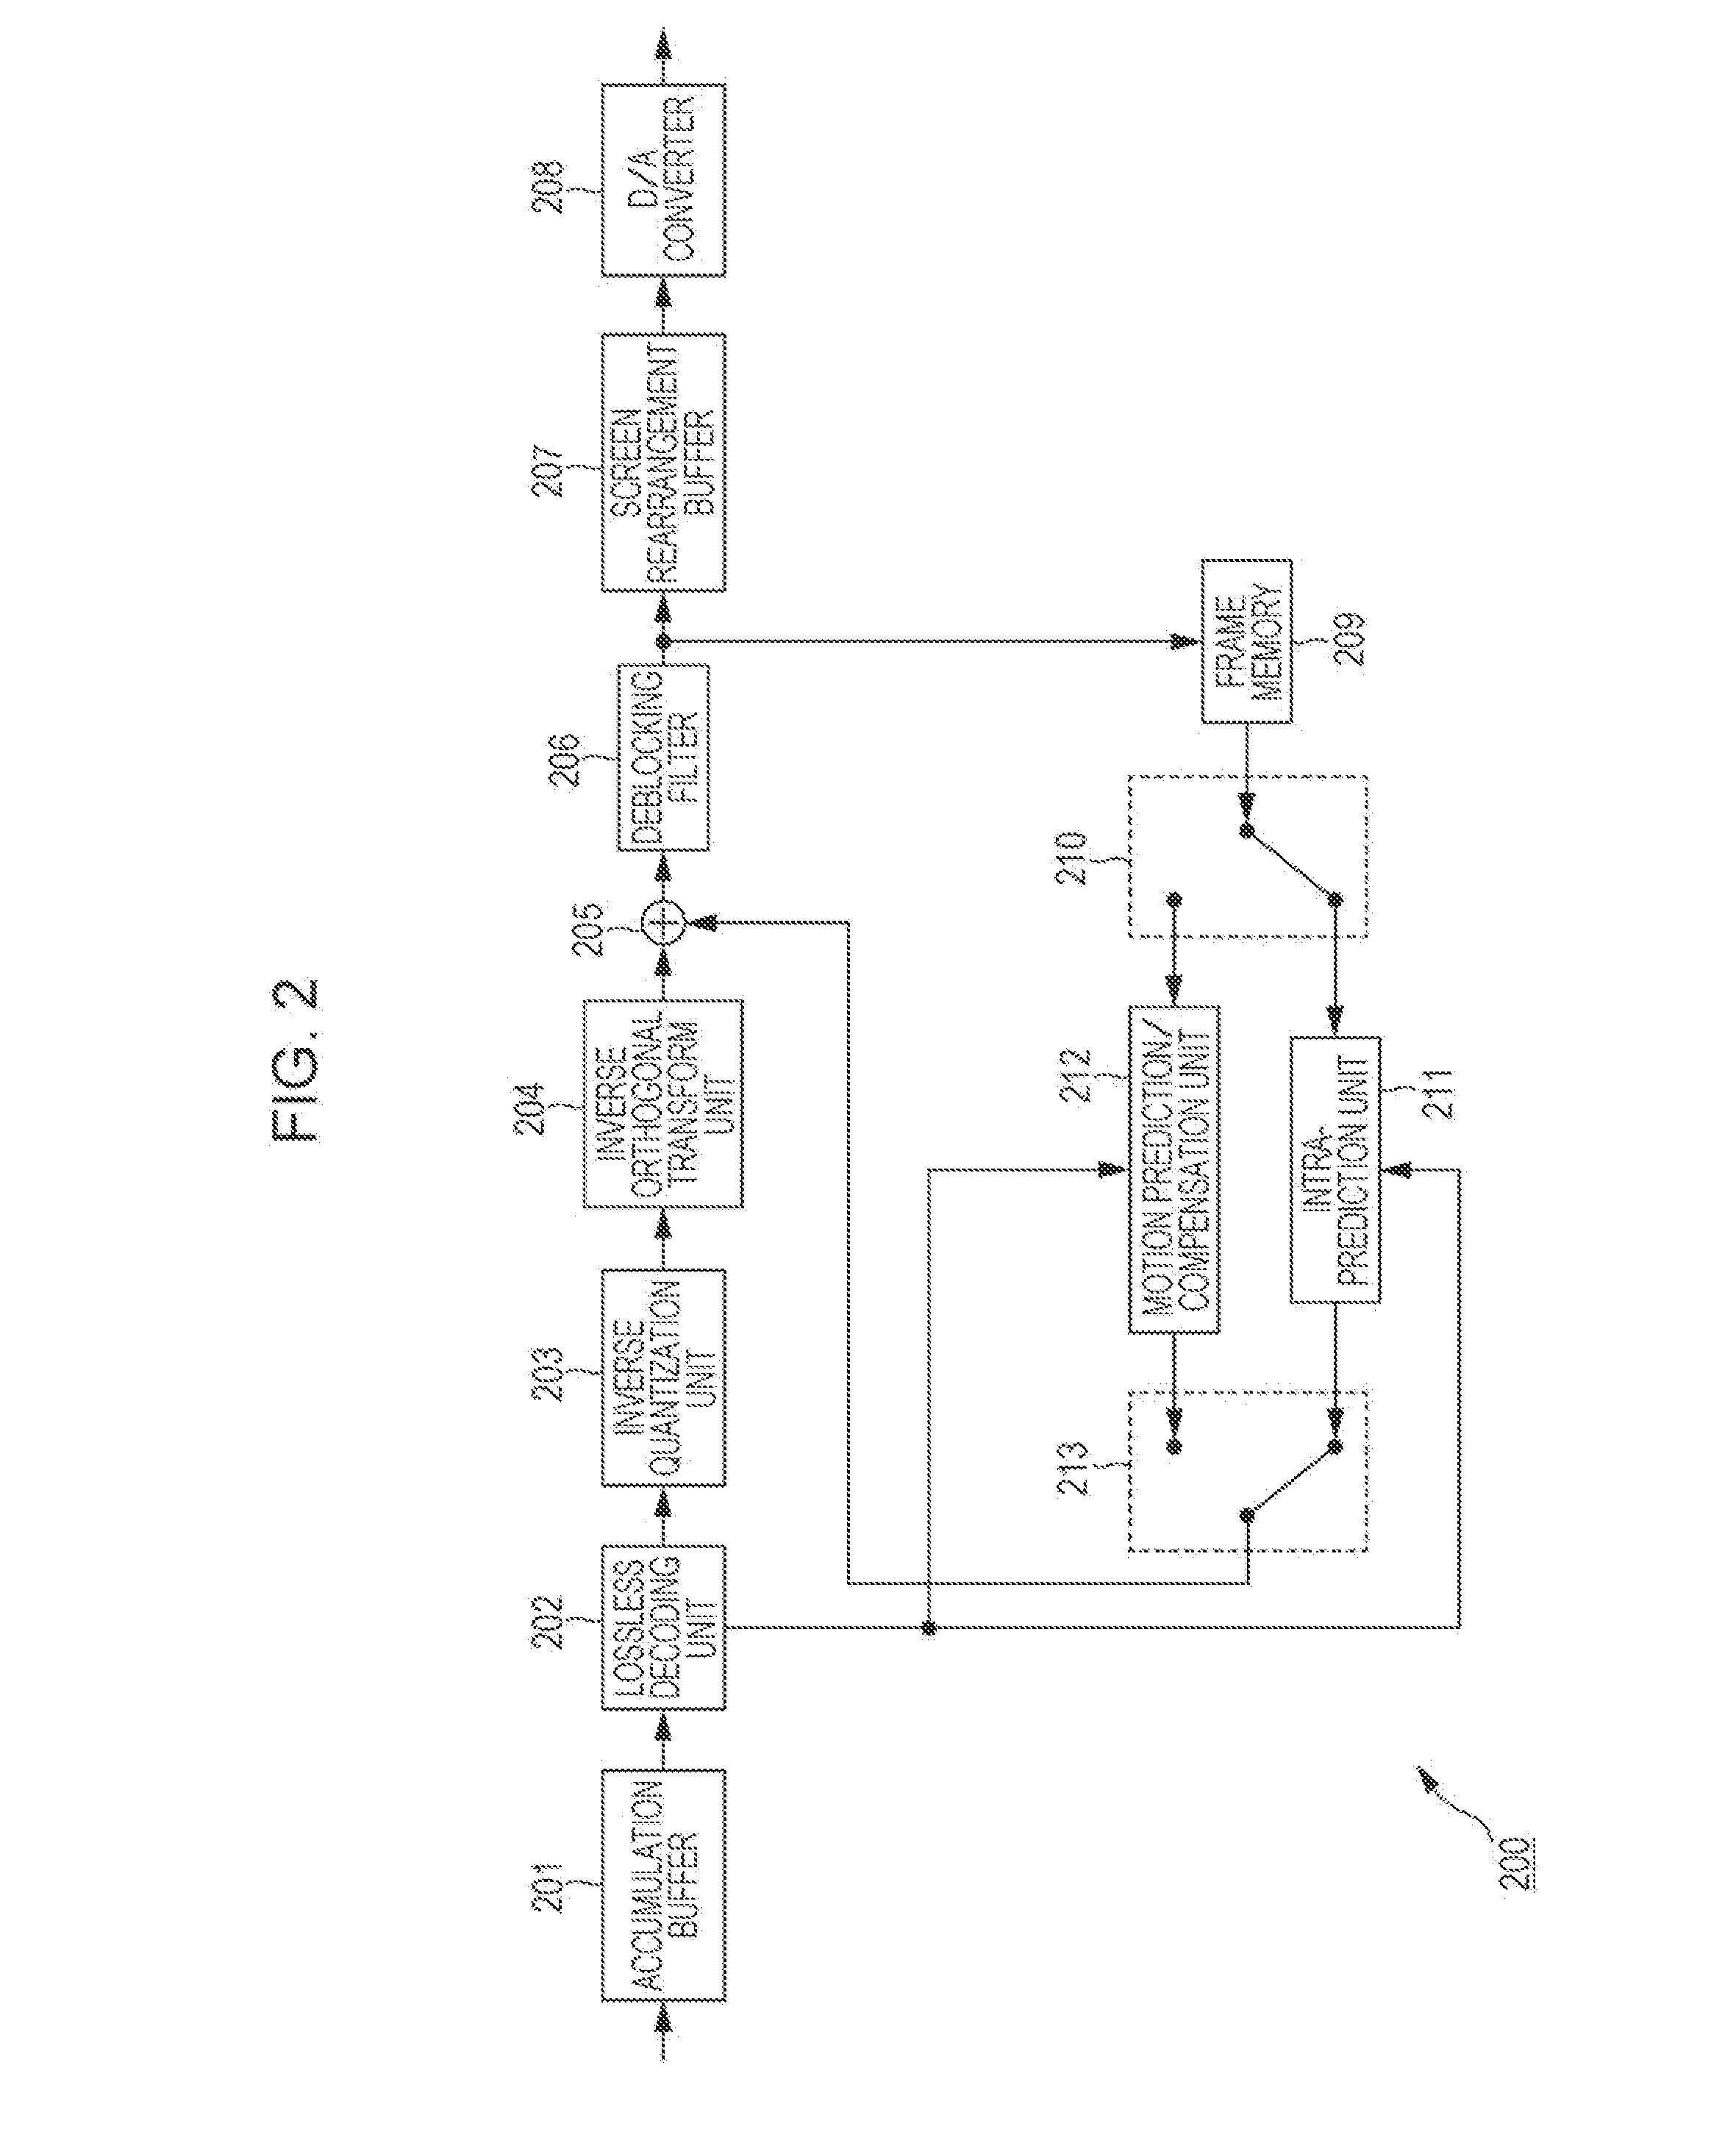 Image processing device and method